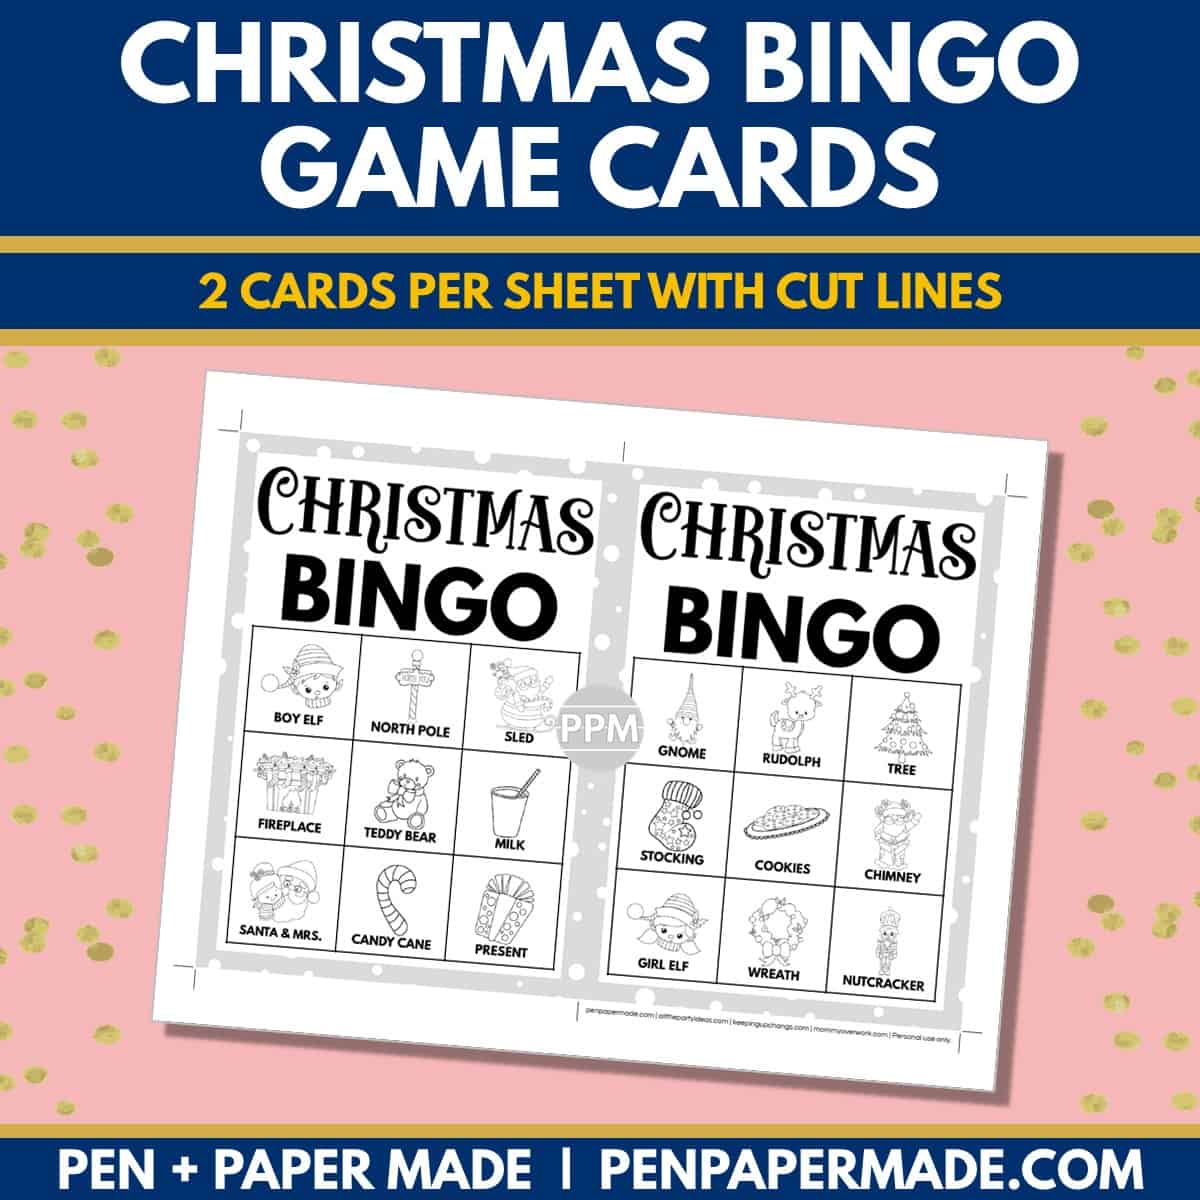 christmas bingo card 3x3 5x7 game boards with images and text words.